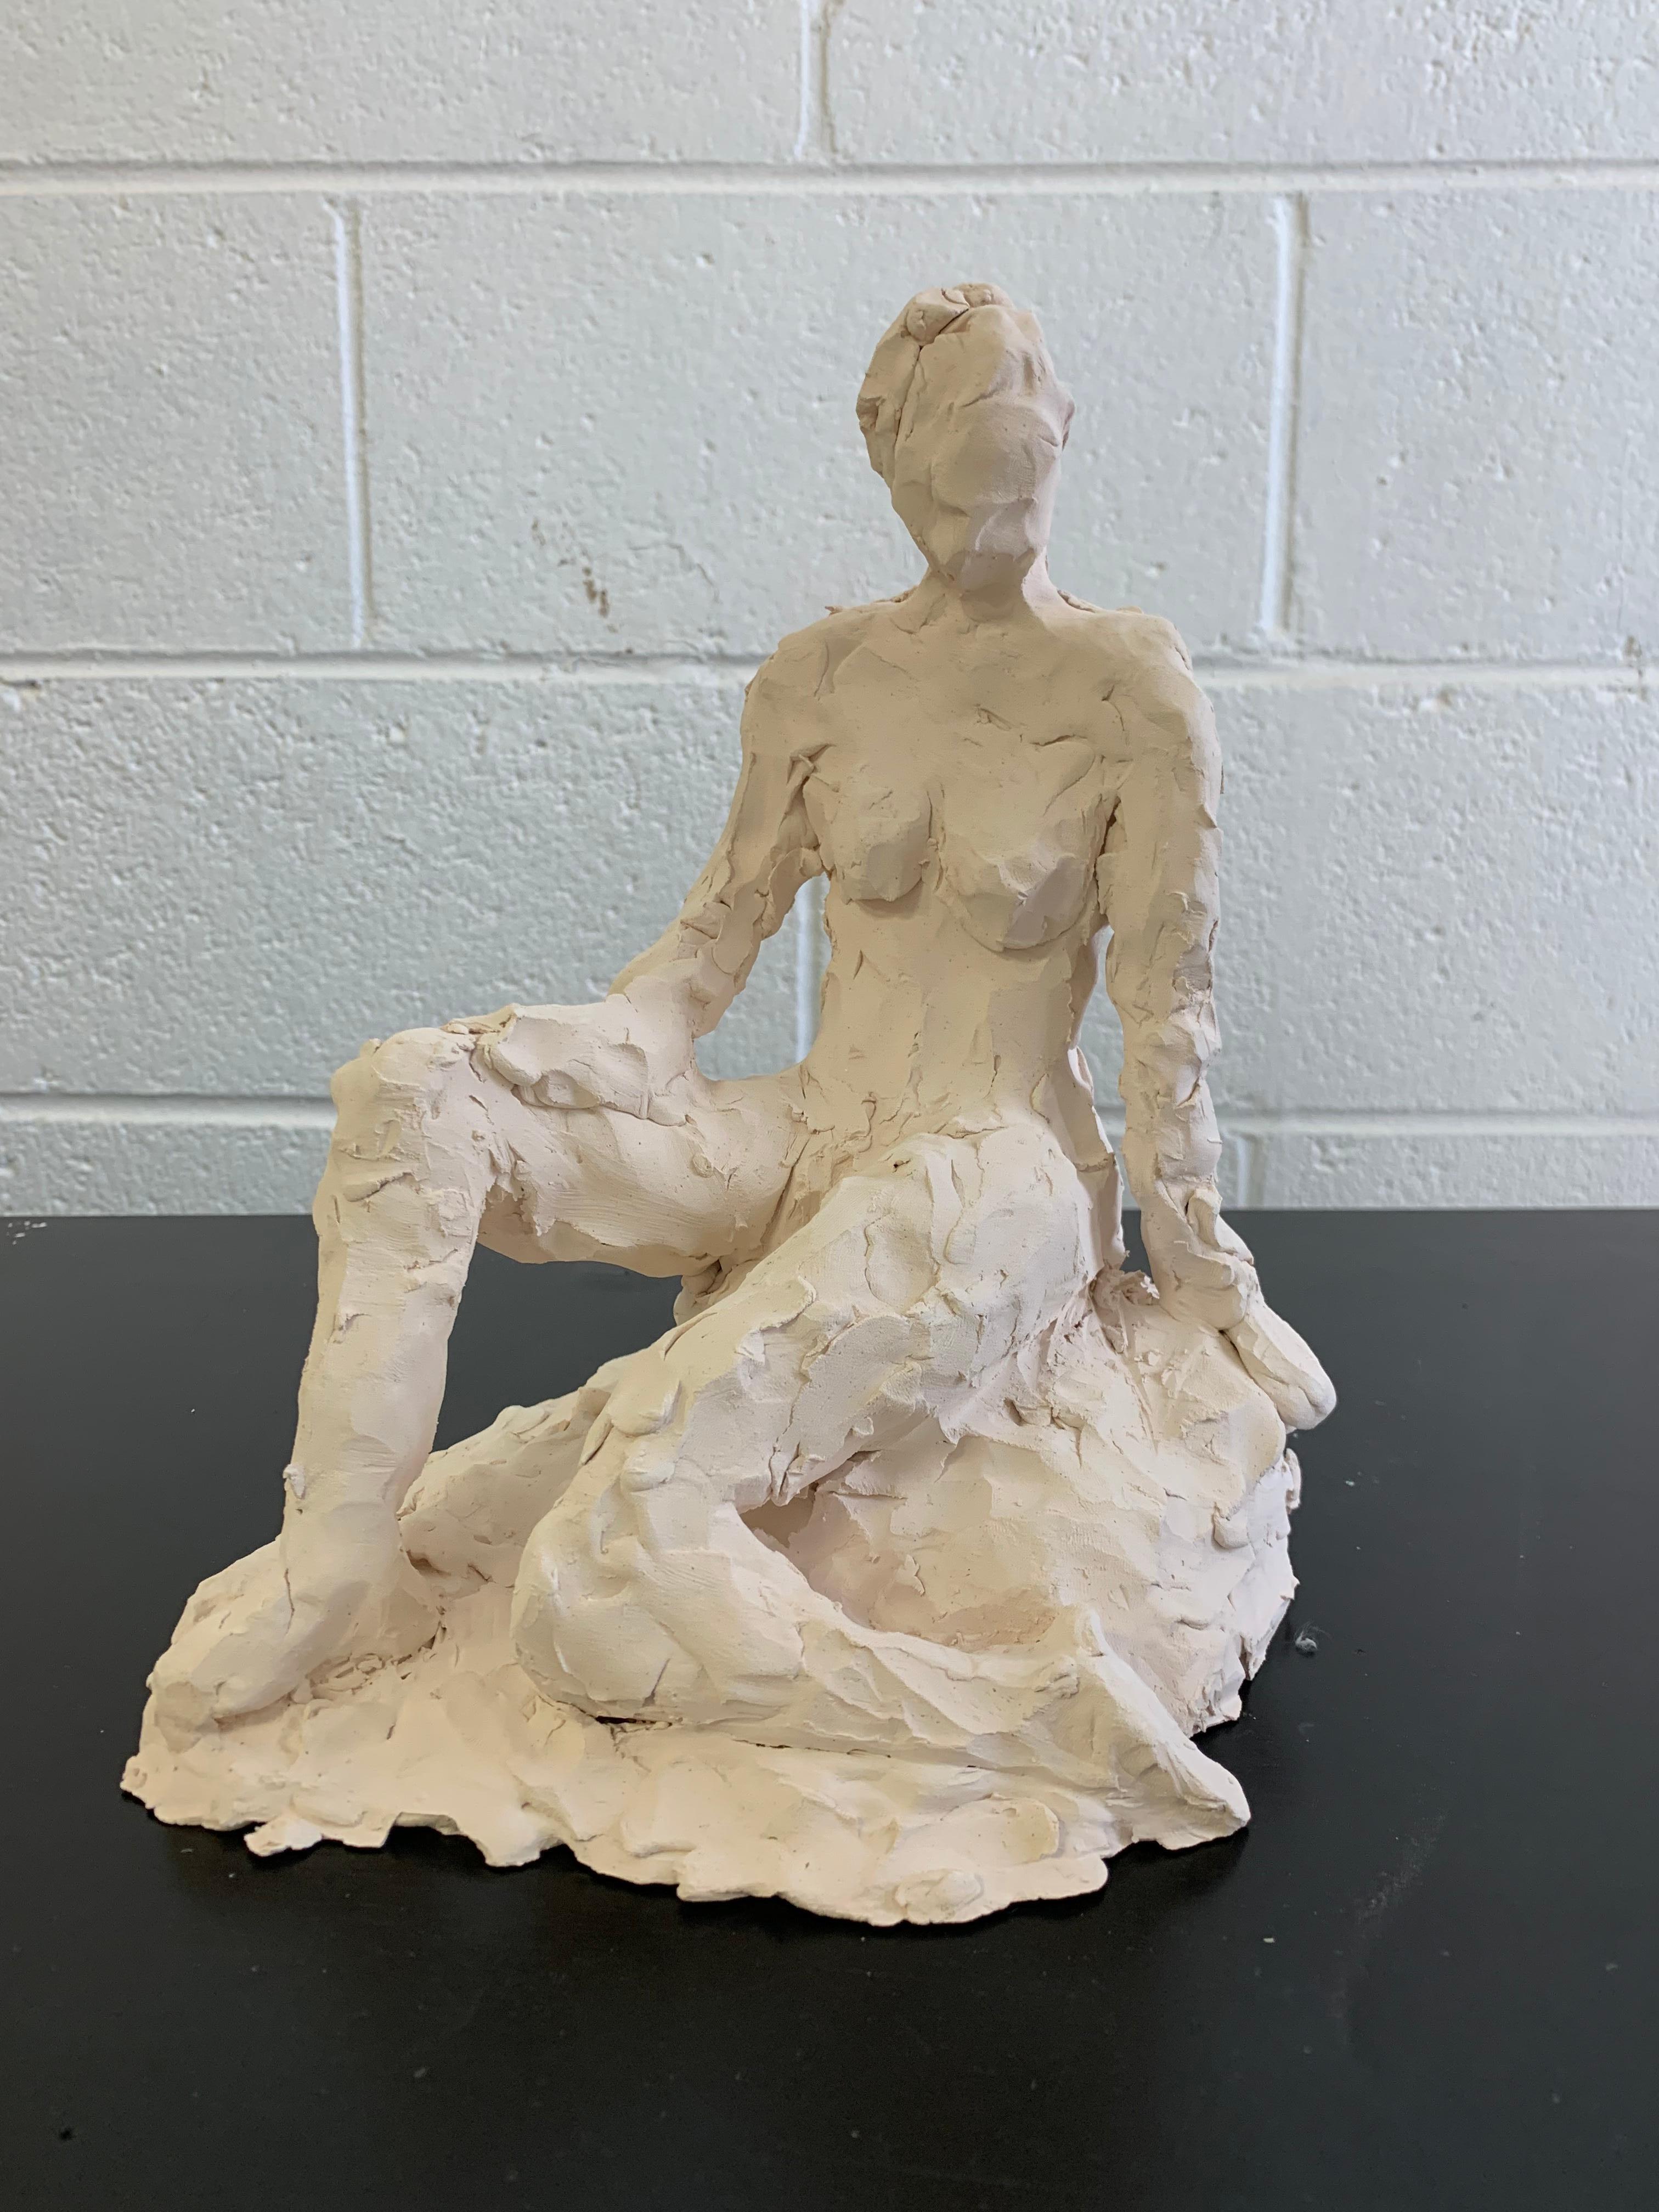 Lovely female clay sculpture by Stephanie Wheeler
Signed on back 